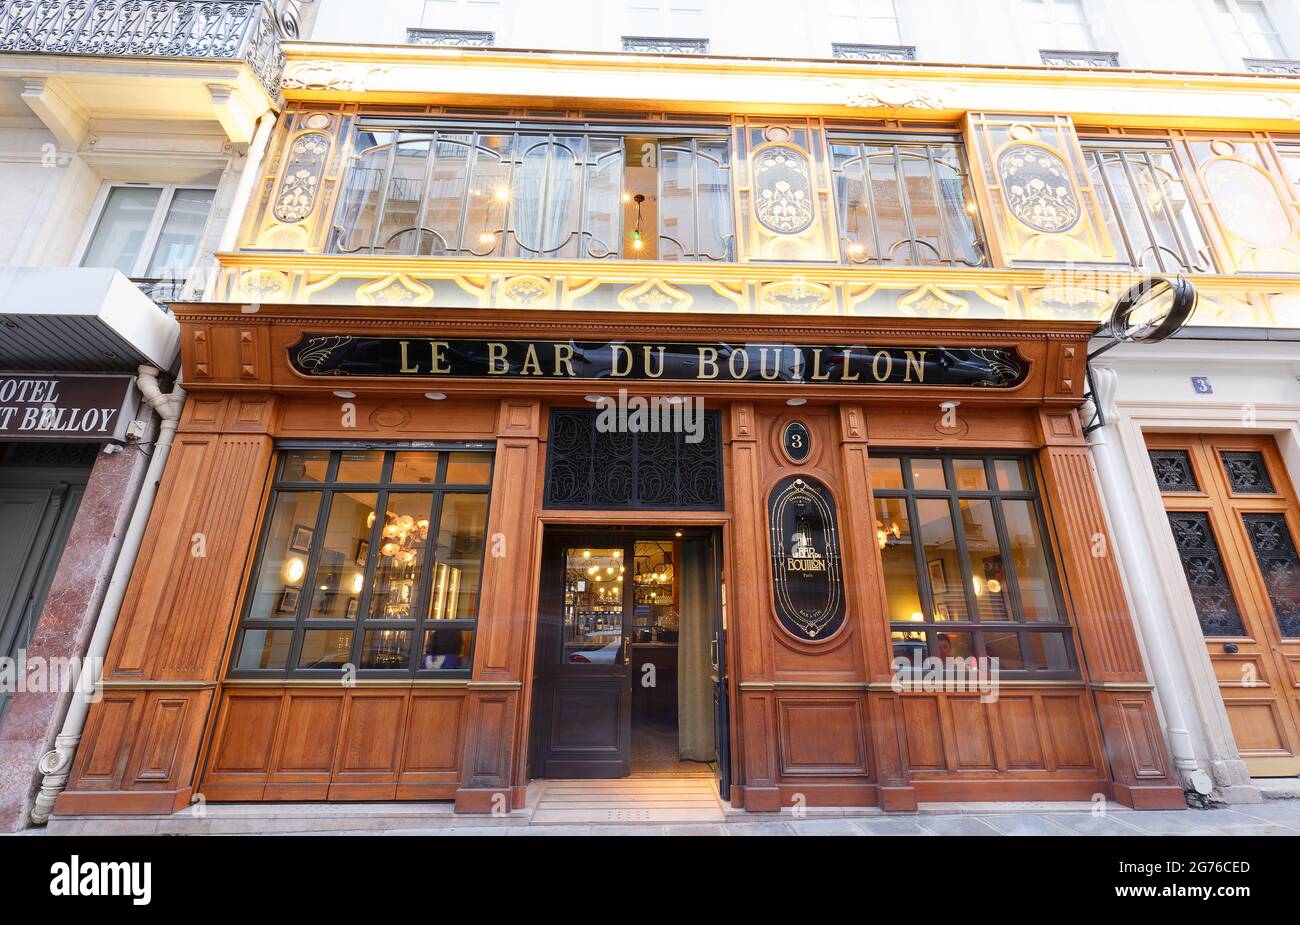 Bouillon Camille Chartier is historic French restaurant on Racine Street in Paris . It showed characteristic Art Nouveau style: carved wood and Stock Photo